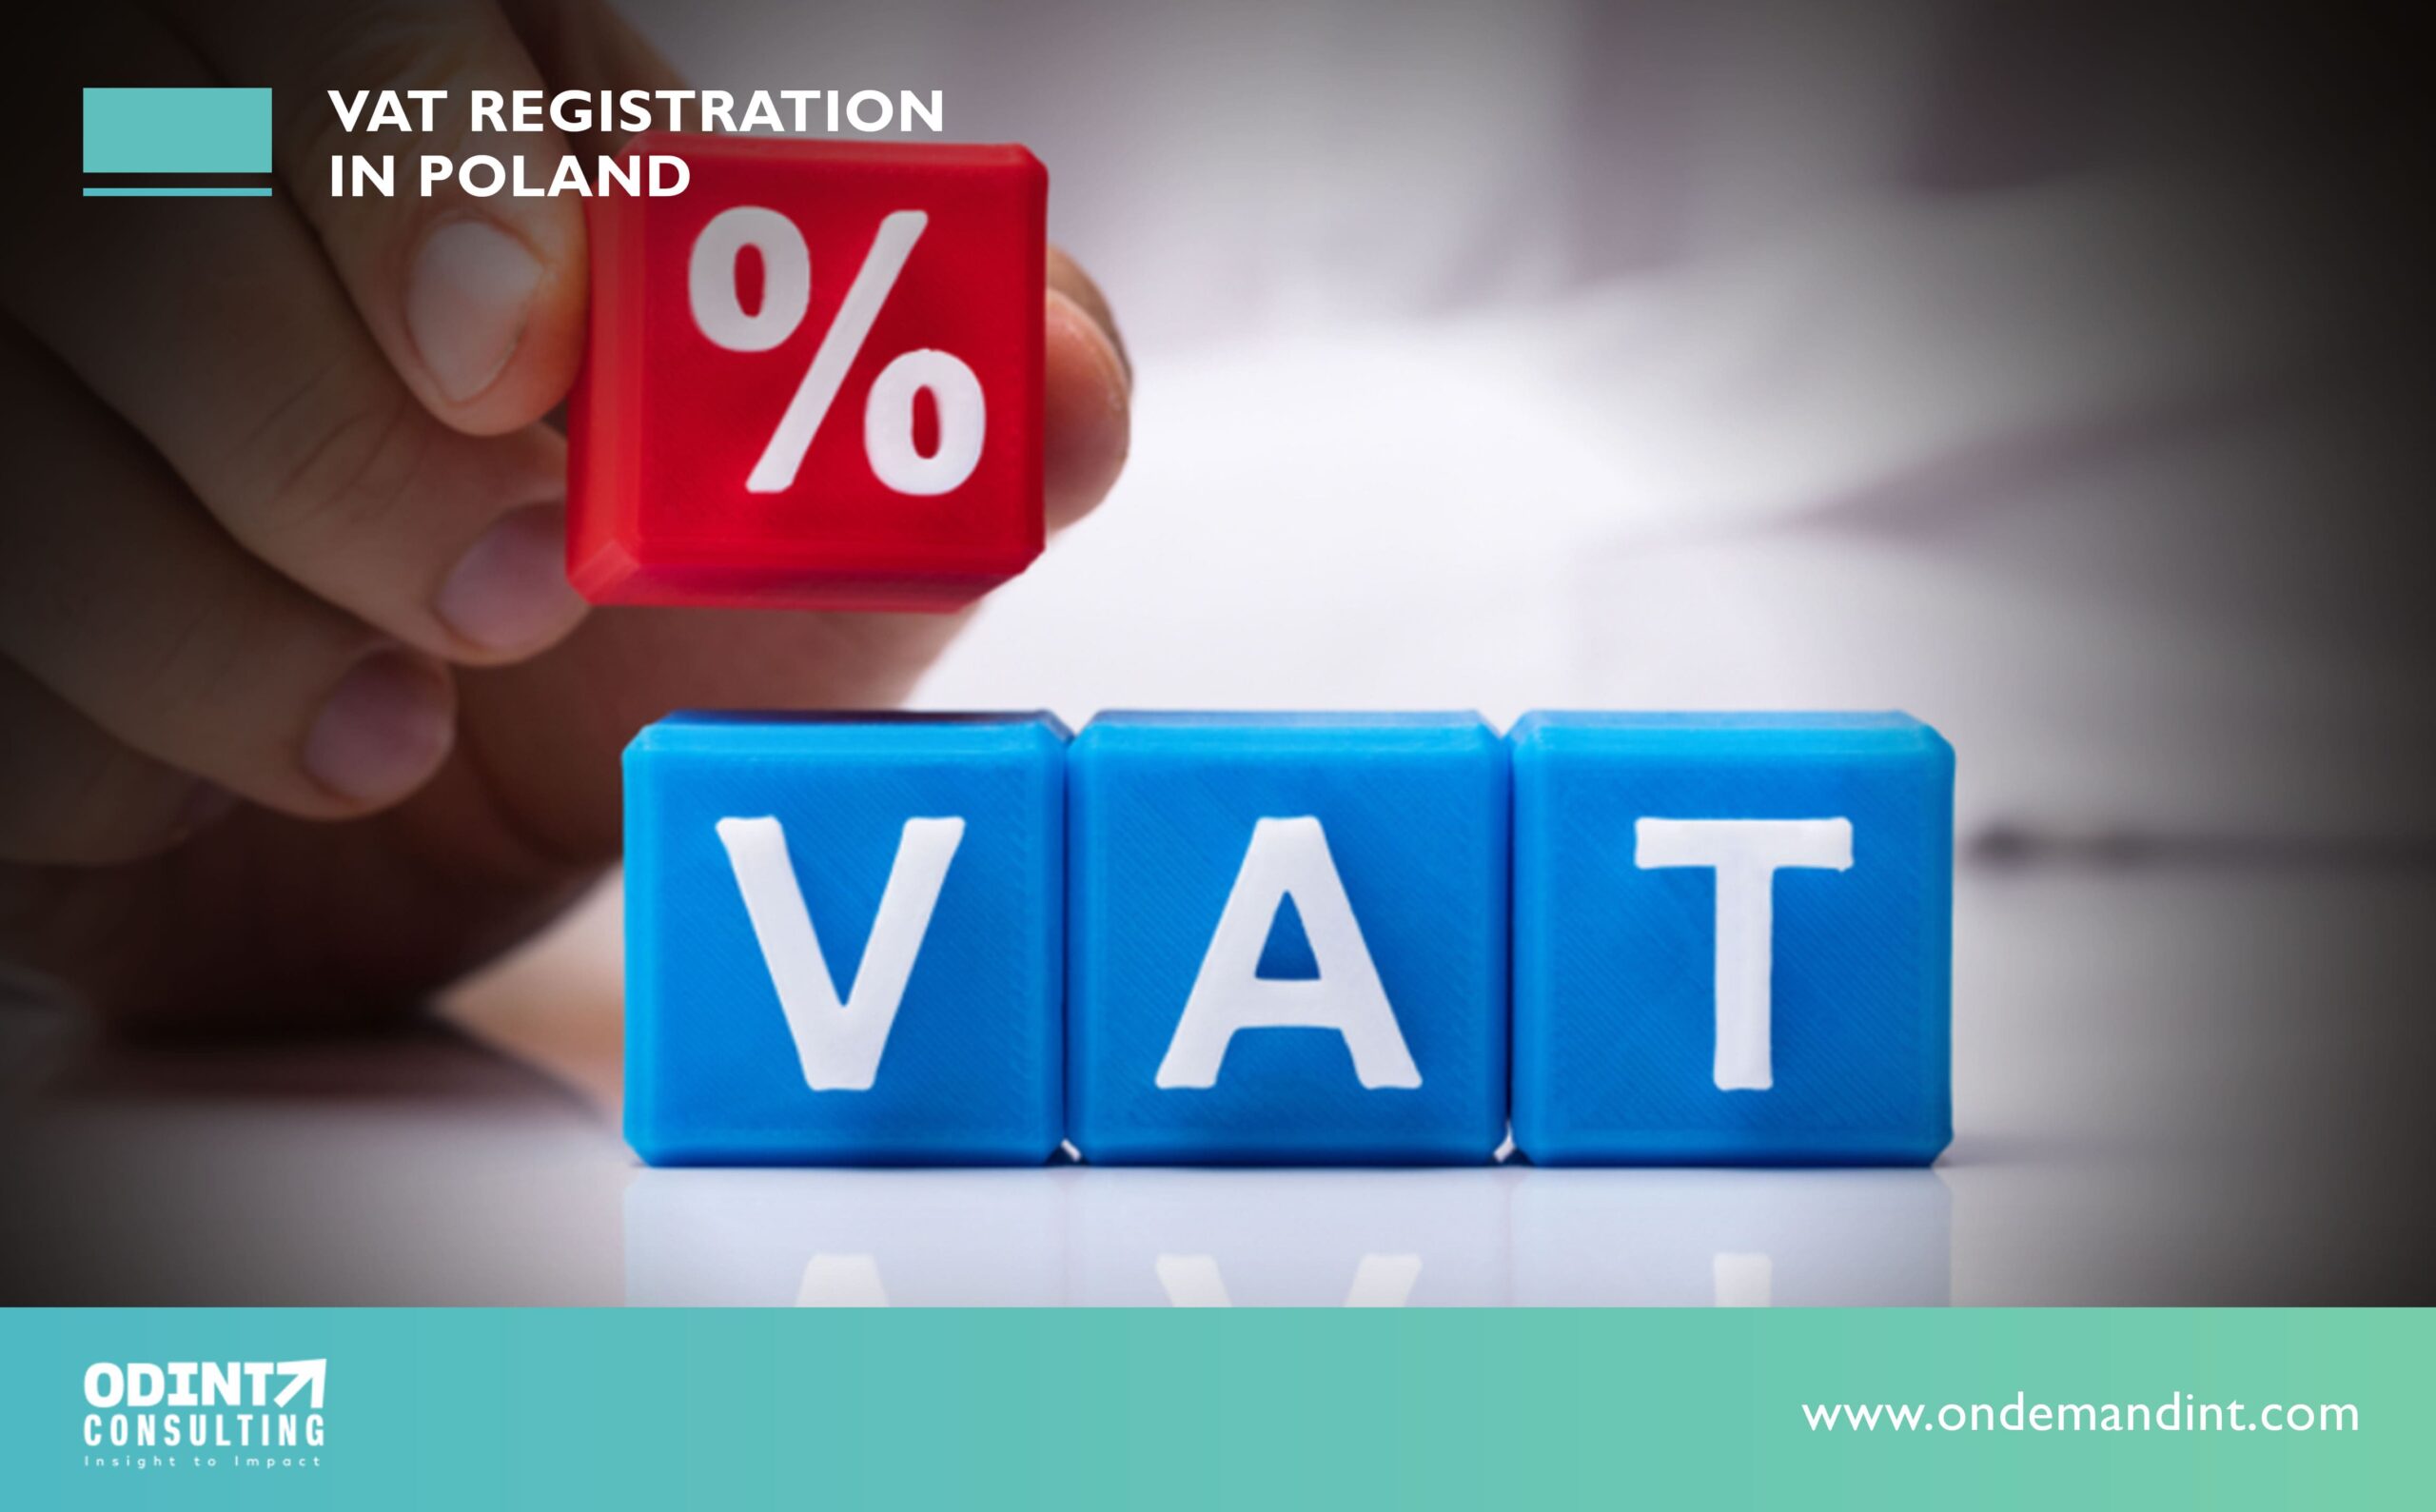 VAT Registration in Poland: Process, Documents & Important Conditions